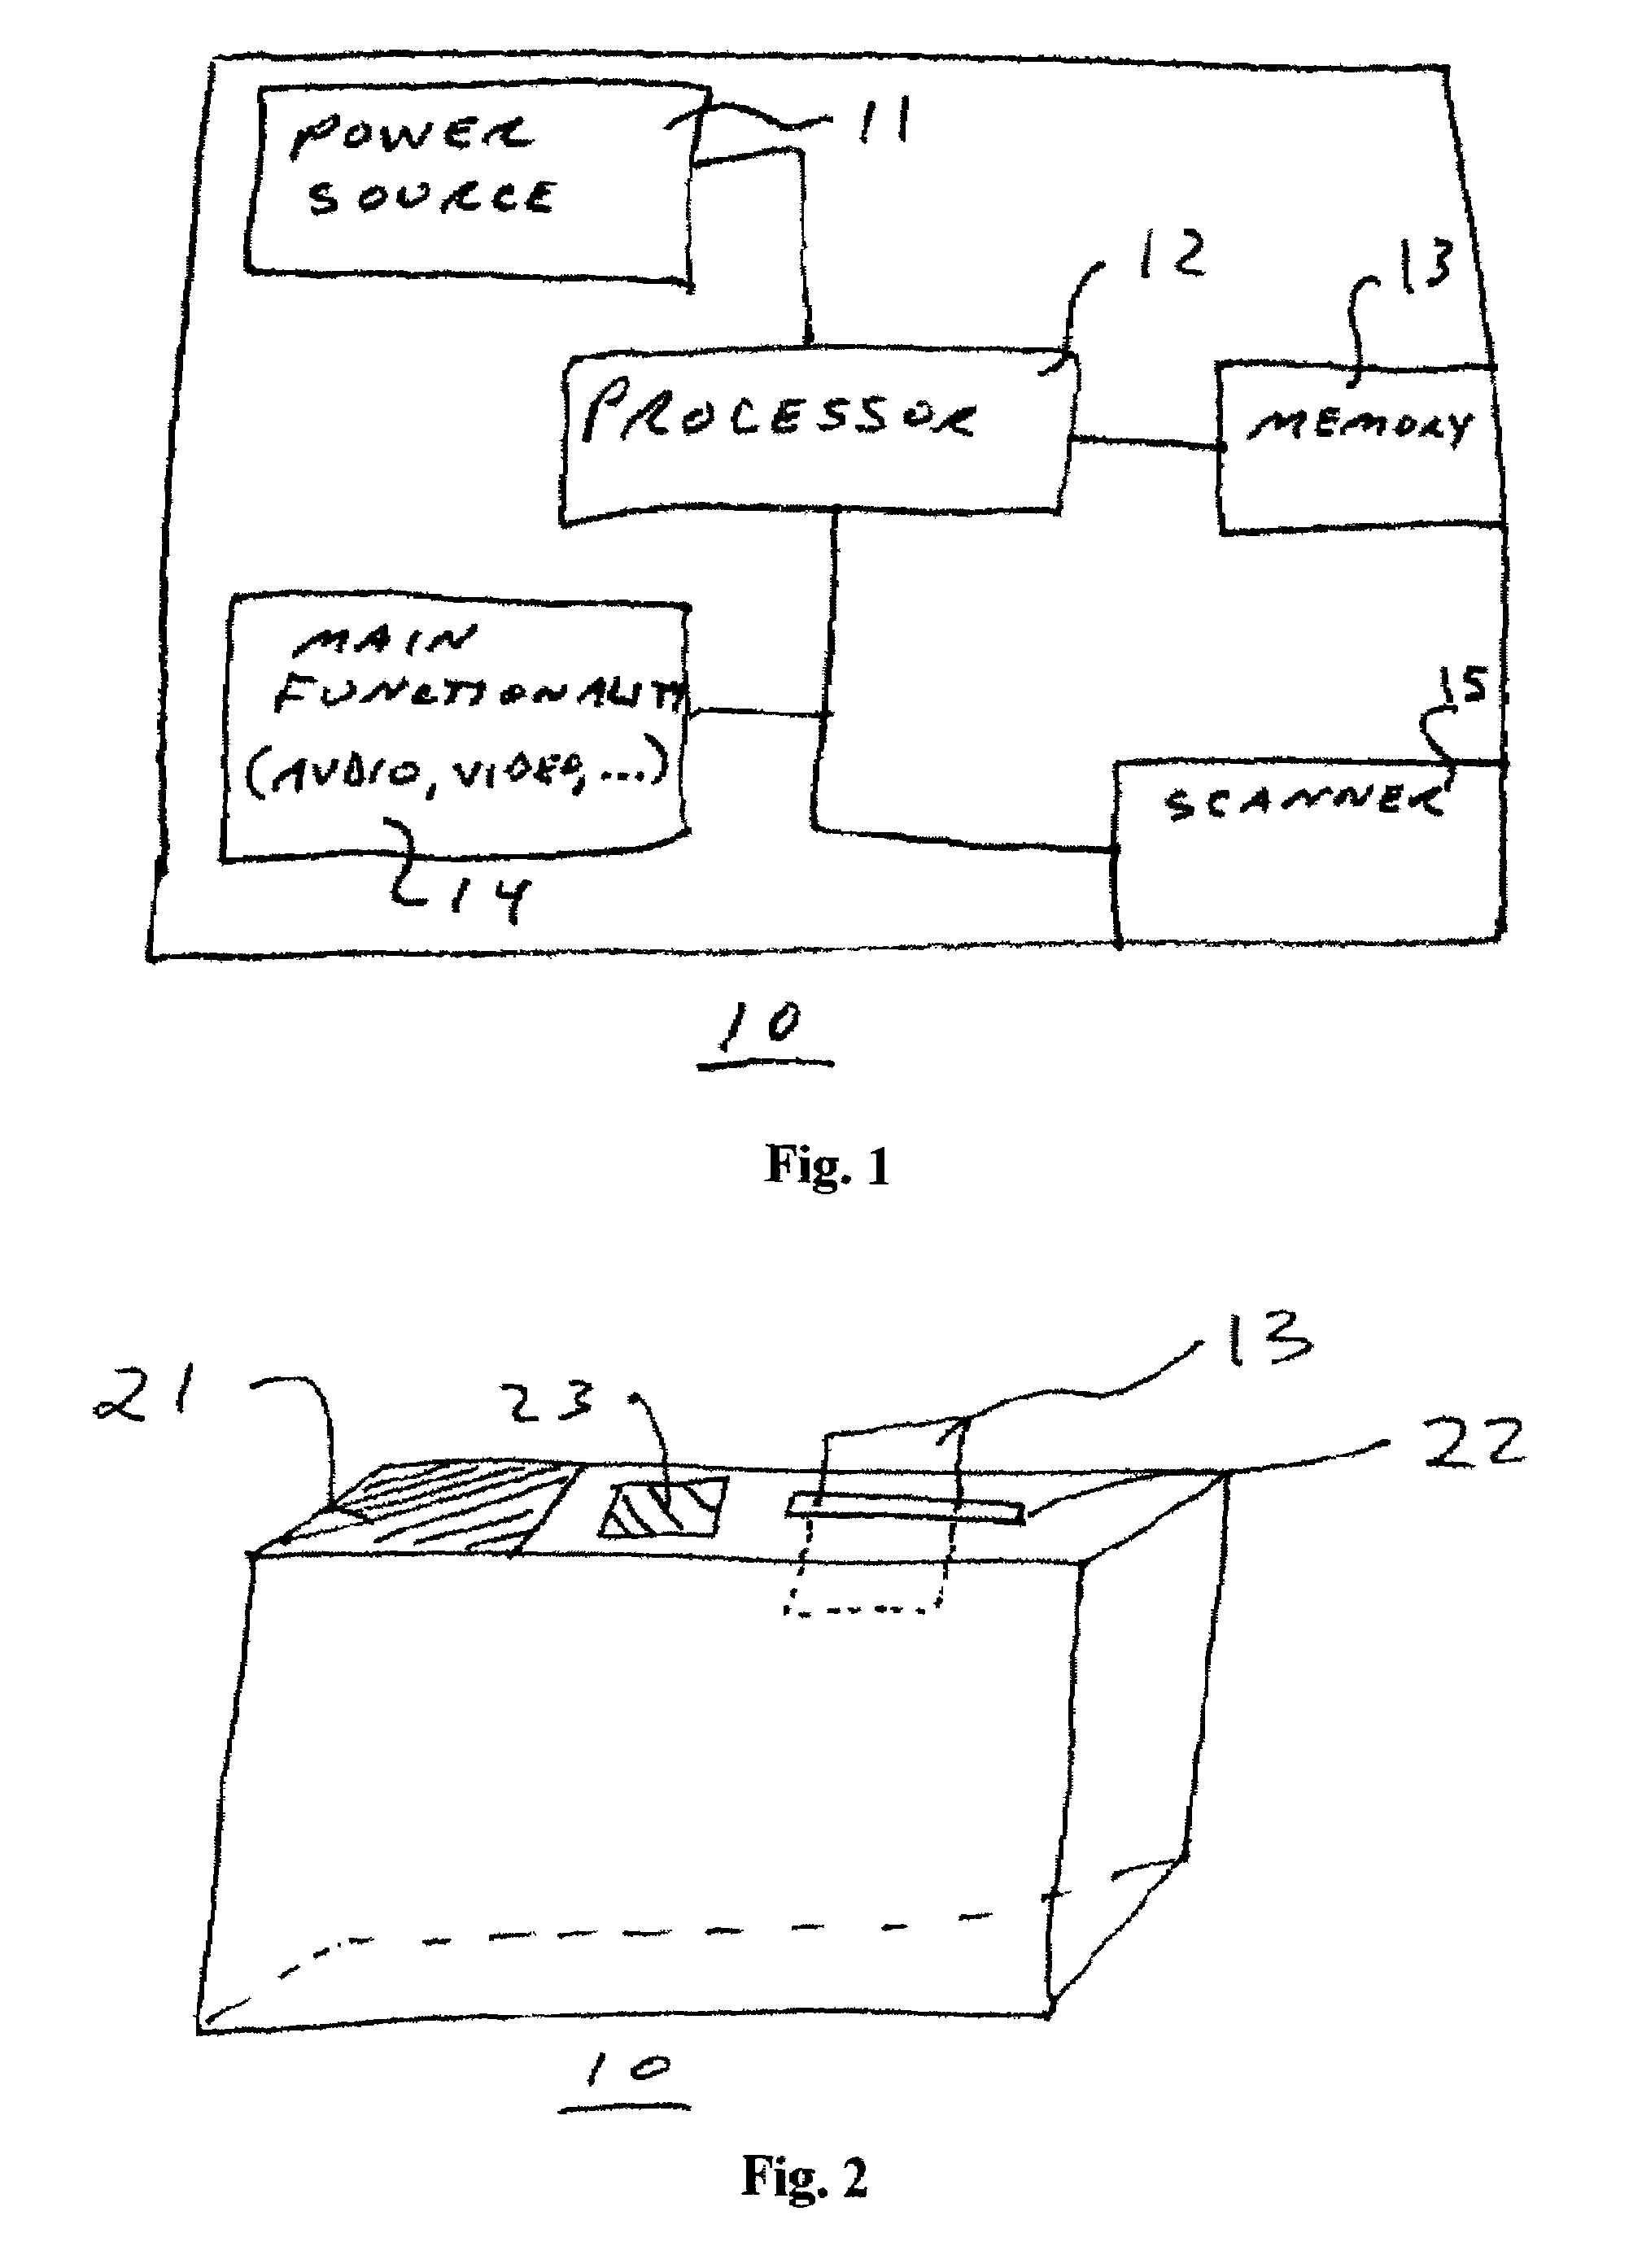 Method and system for performing electronic retailing